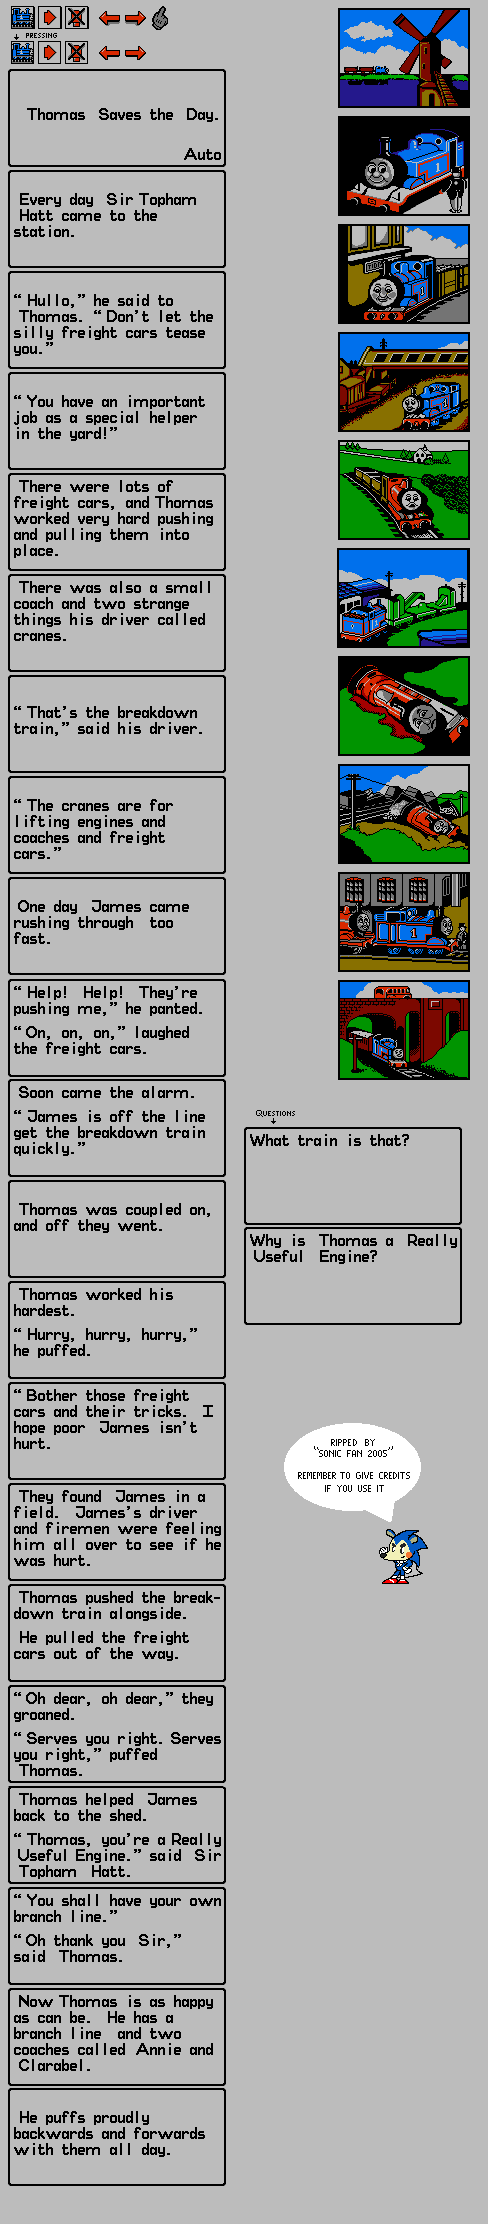 Thomas the Tank Engine and Friends (Prototype) - Thomas Saves the Day